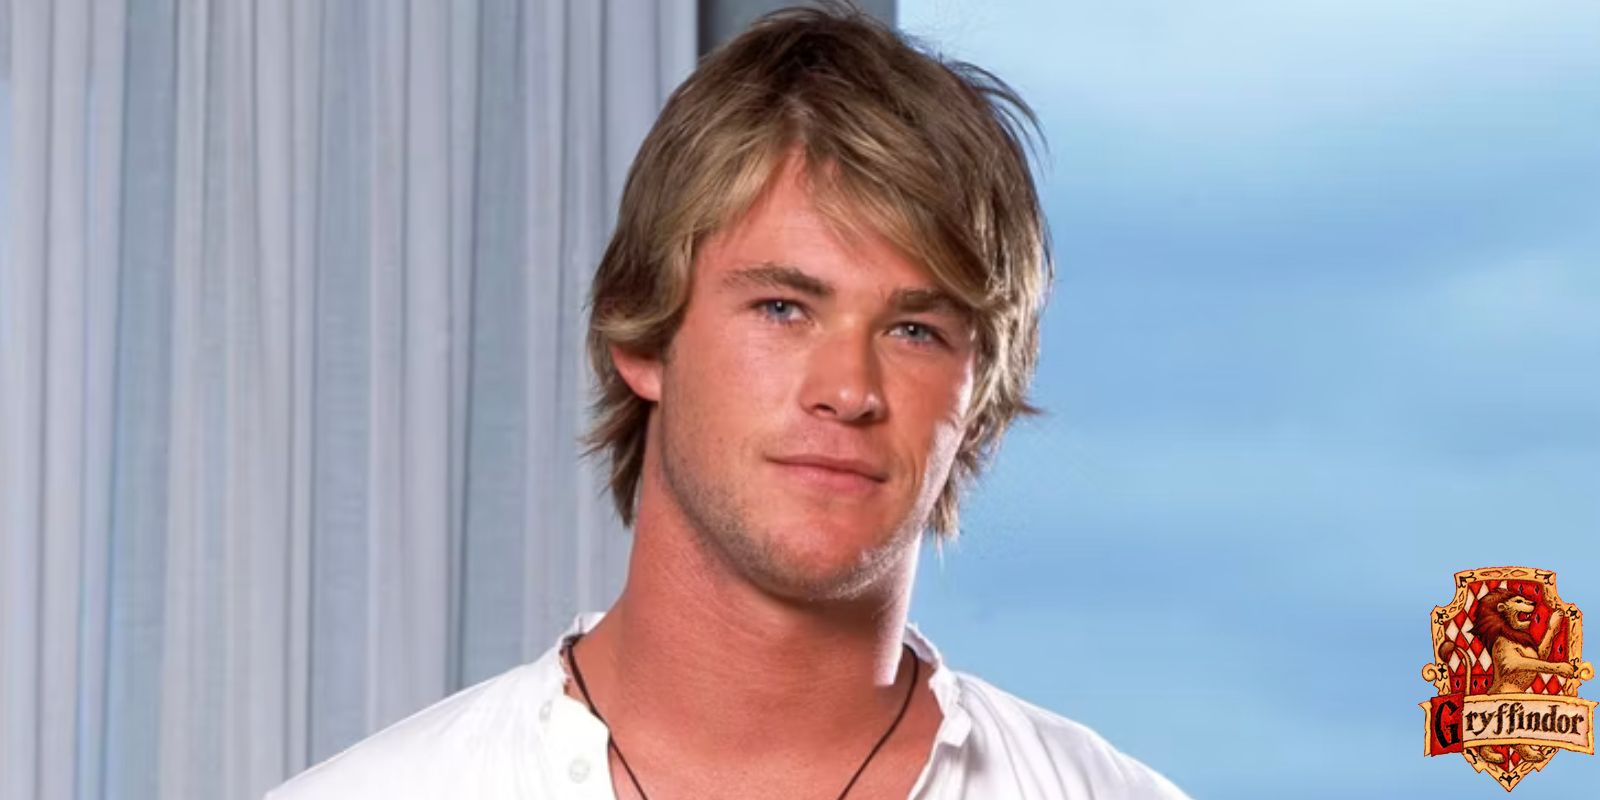 Chris Hemsworth as Kim Hyde in Home And Away with a Hogwarts House crest for Gryffindor